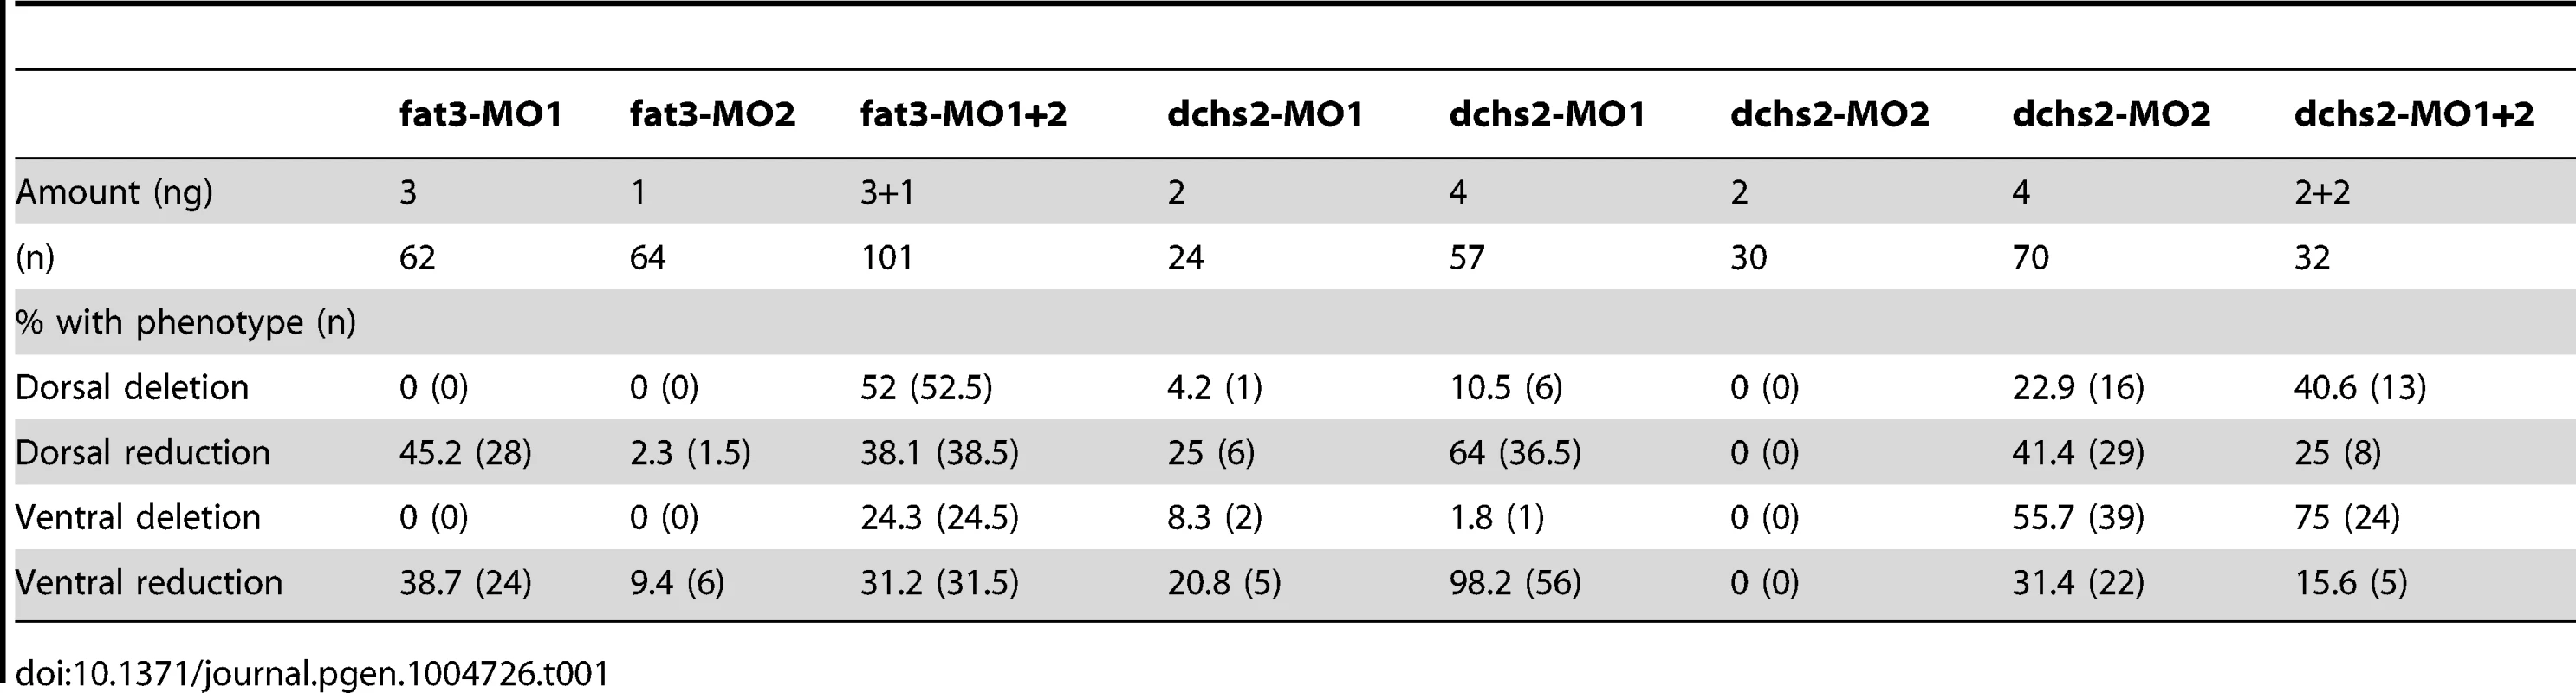 Quantification of Fat3-MO and Dchs2-MO differentiation defects.